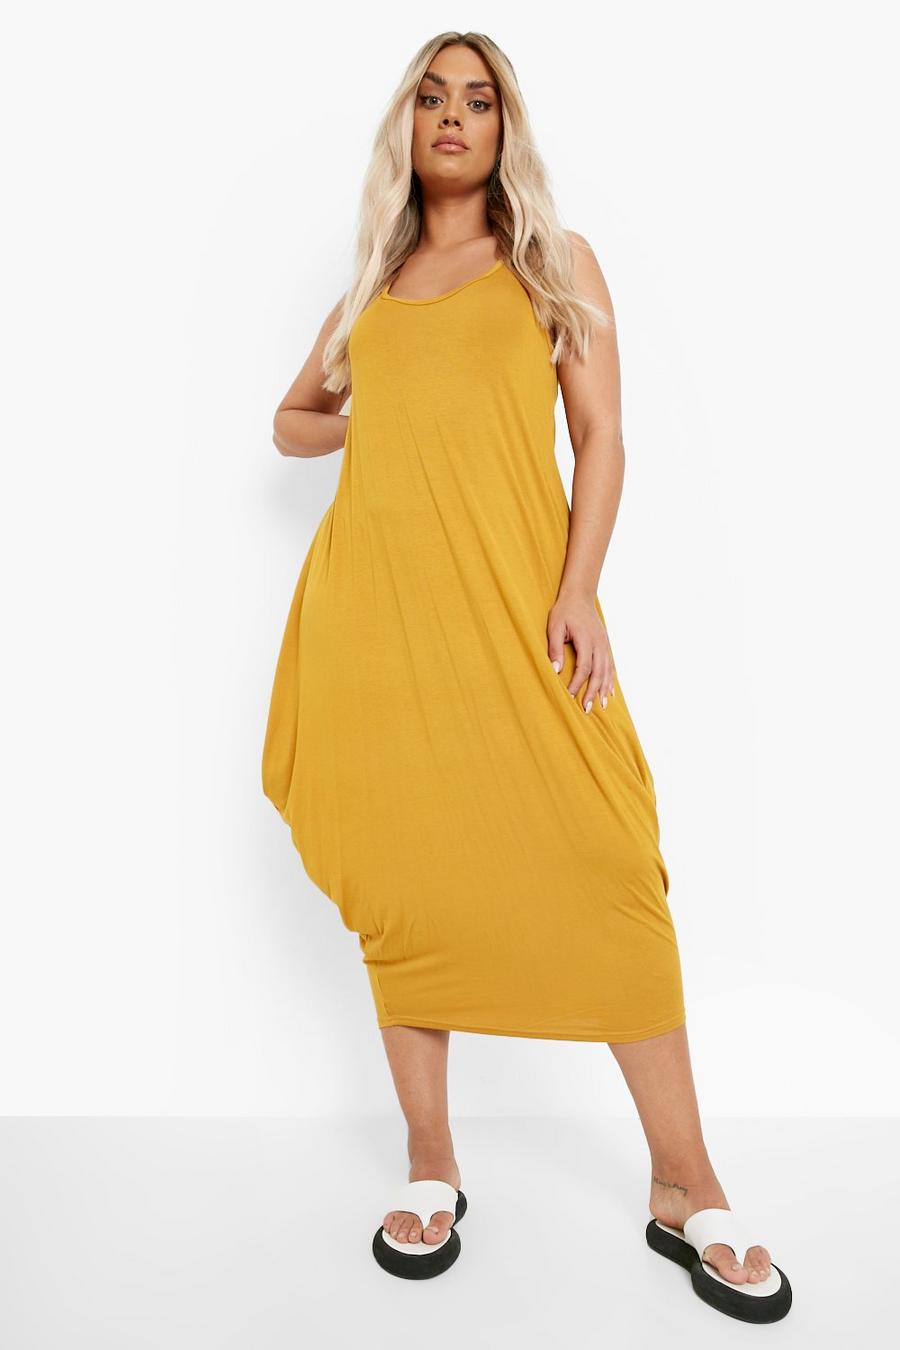 Mustard yellow Plus Racer Back Ruched Midaxi Dress